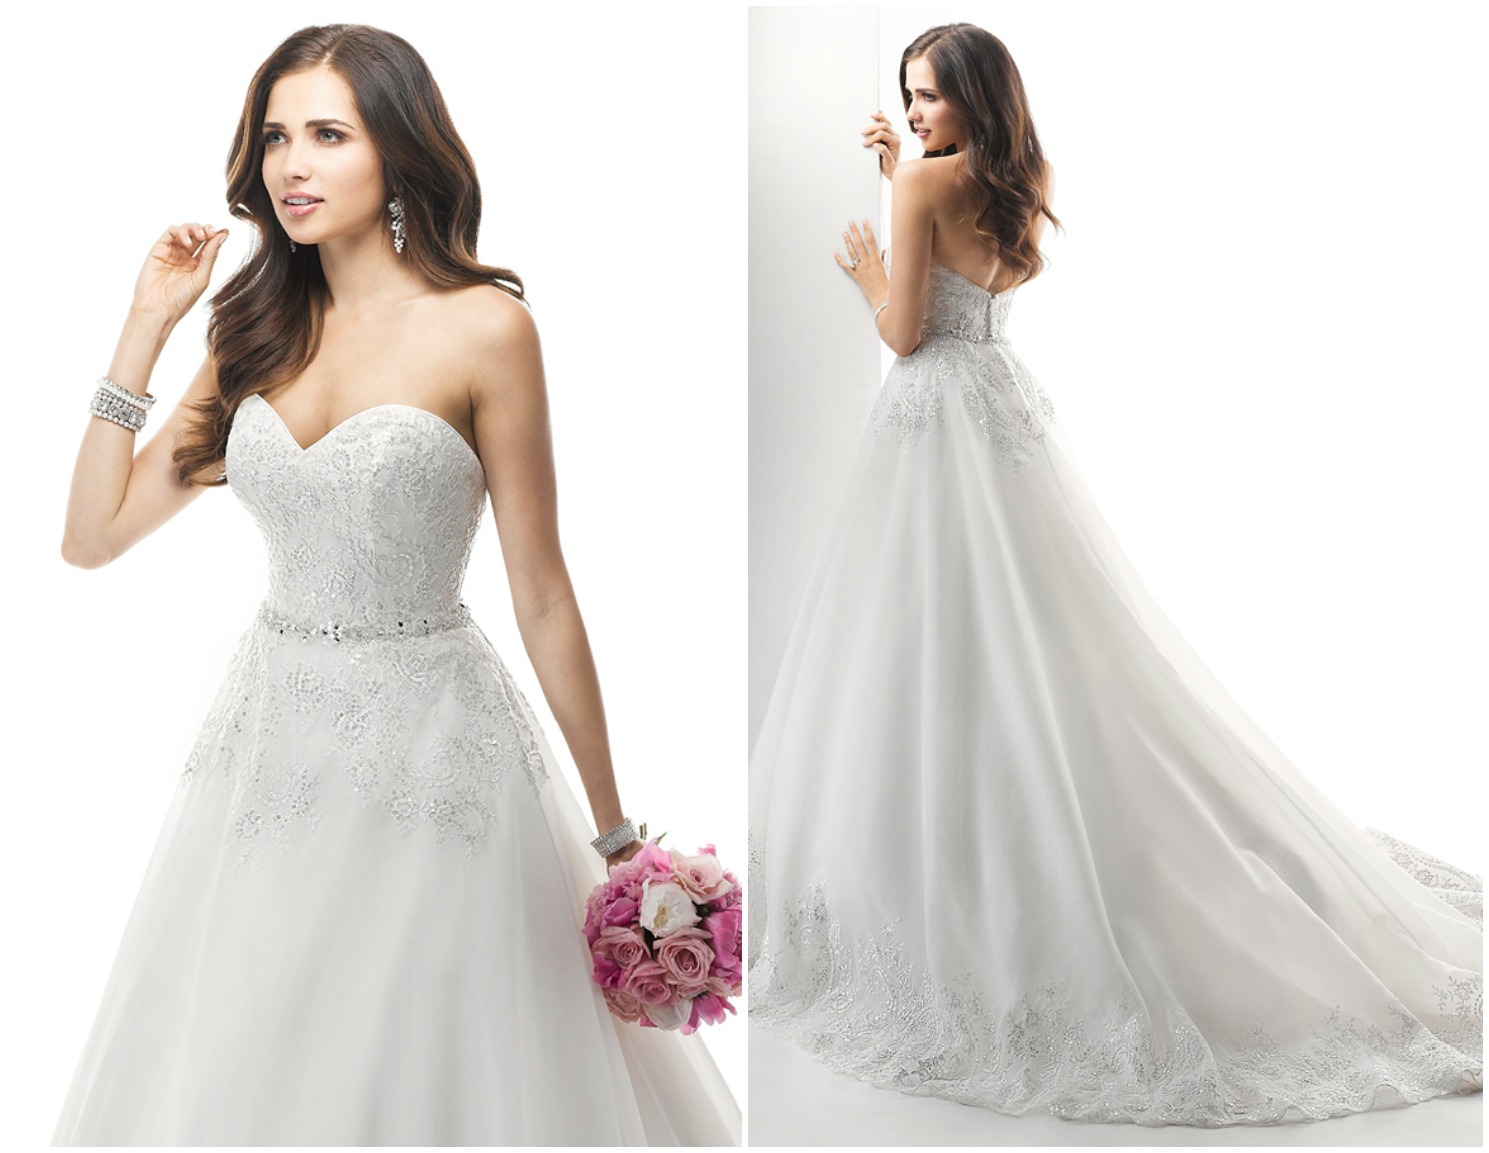 <a href="http://www.maggiesottero.com/dress.aspx?style=4MD848" target="_blank">Maggie Sottero</a>